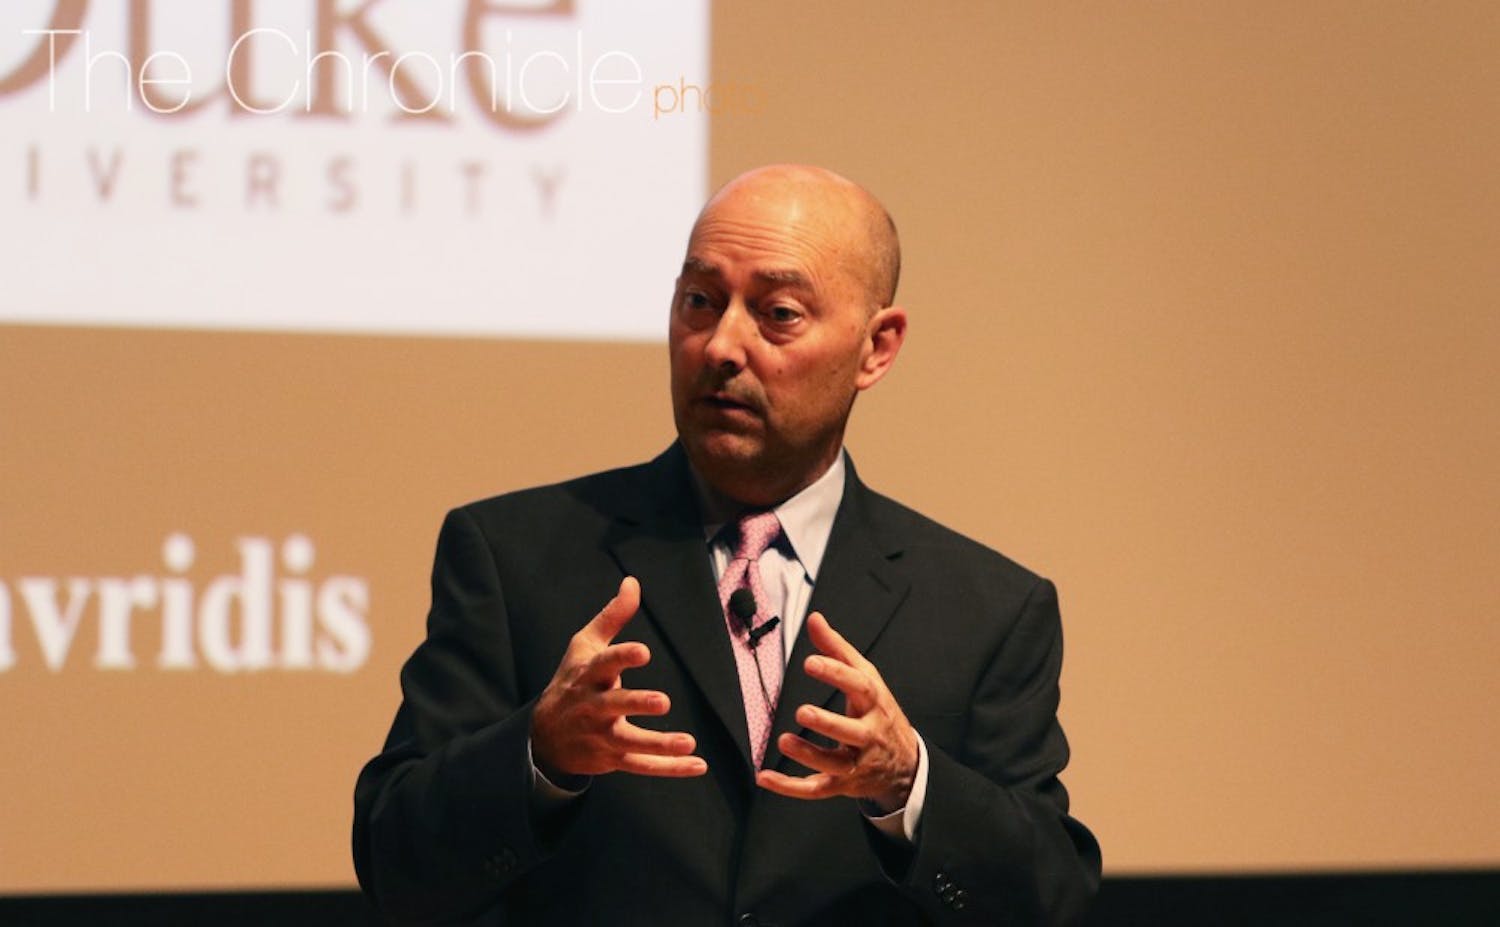 Retired Admiral James Stavridis is&nbsp;the former supreme allied commander of the North Atlantic Treaty Organization.